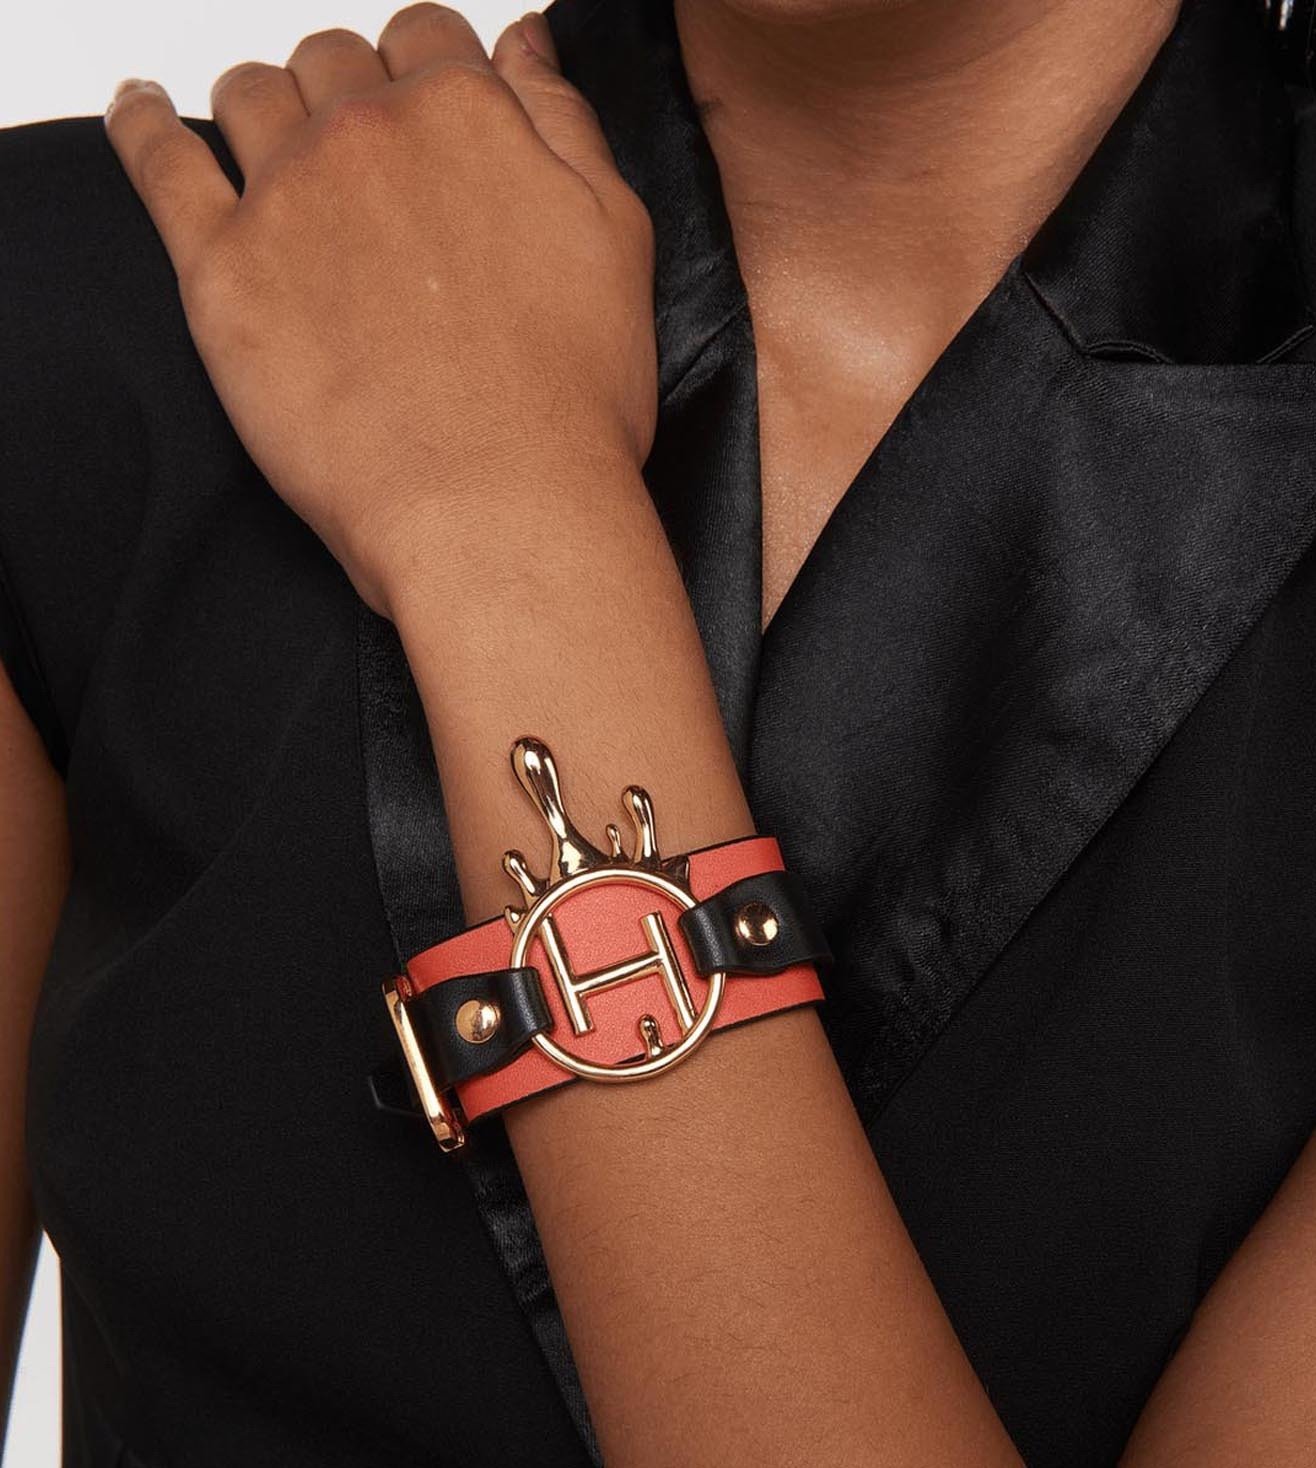 Outhouse - OH Series The Oh Monogram, Tangerine Double Wrap Leather Bracelet